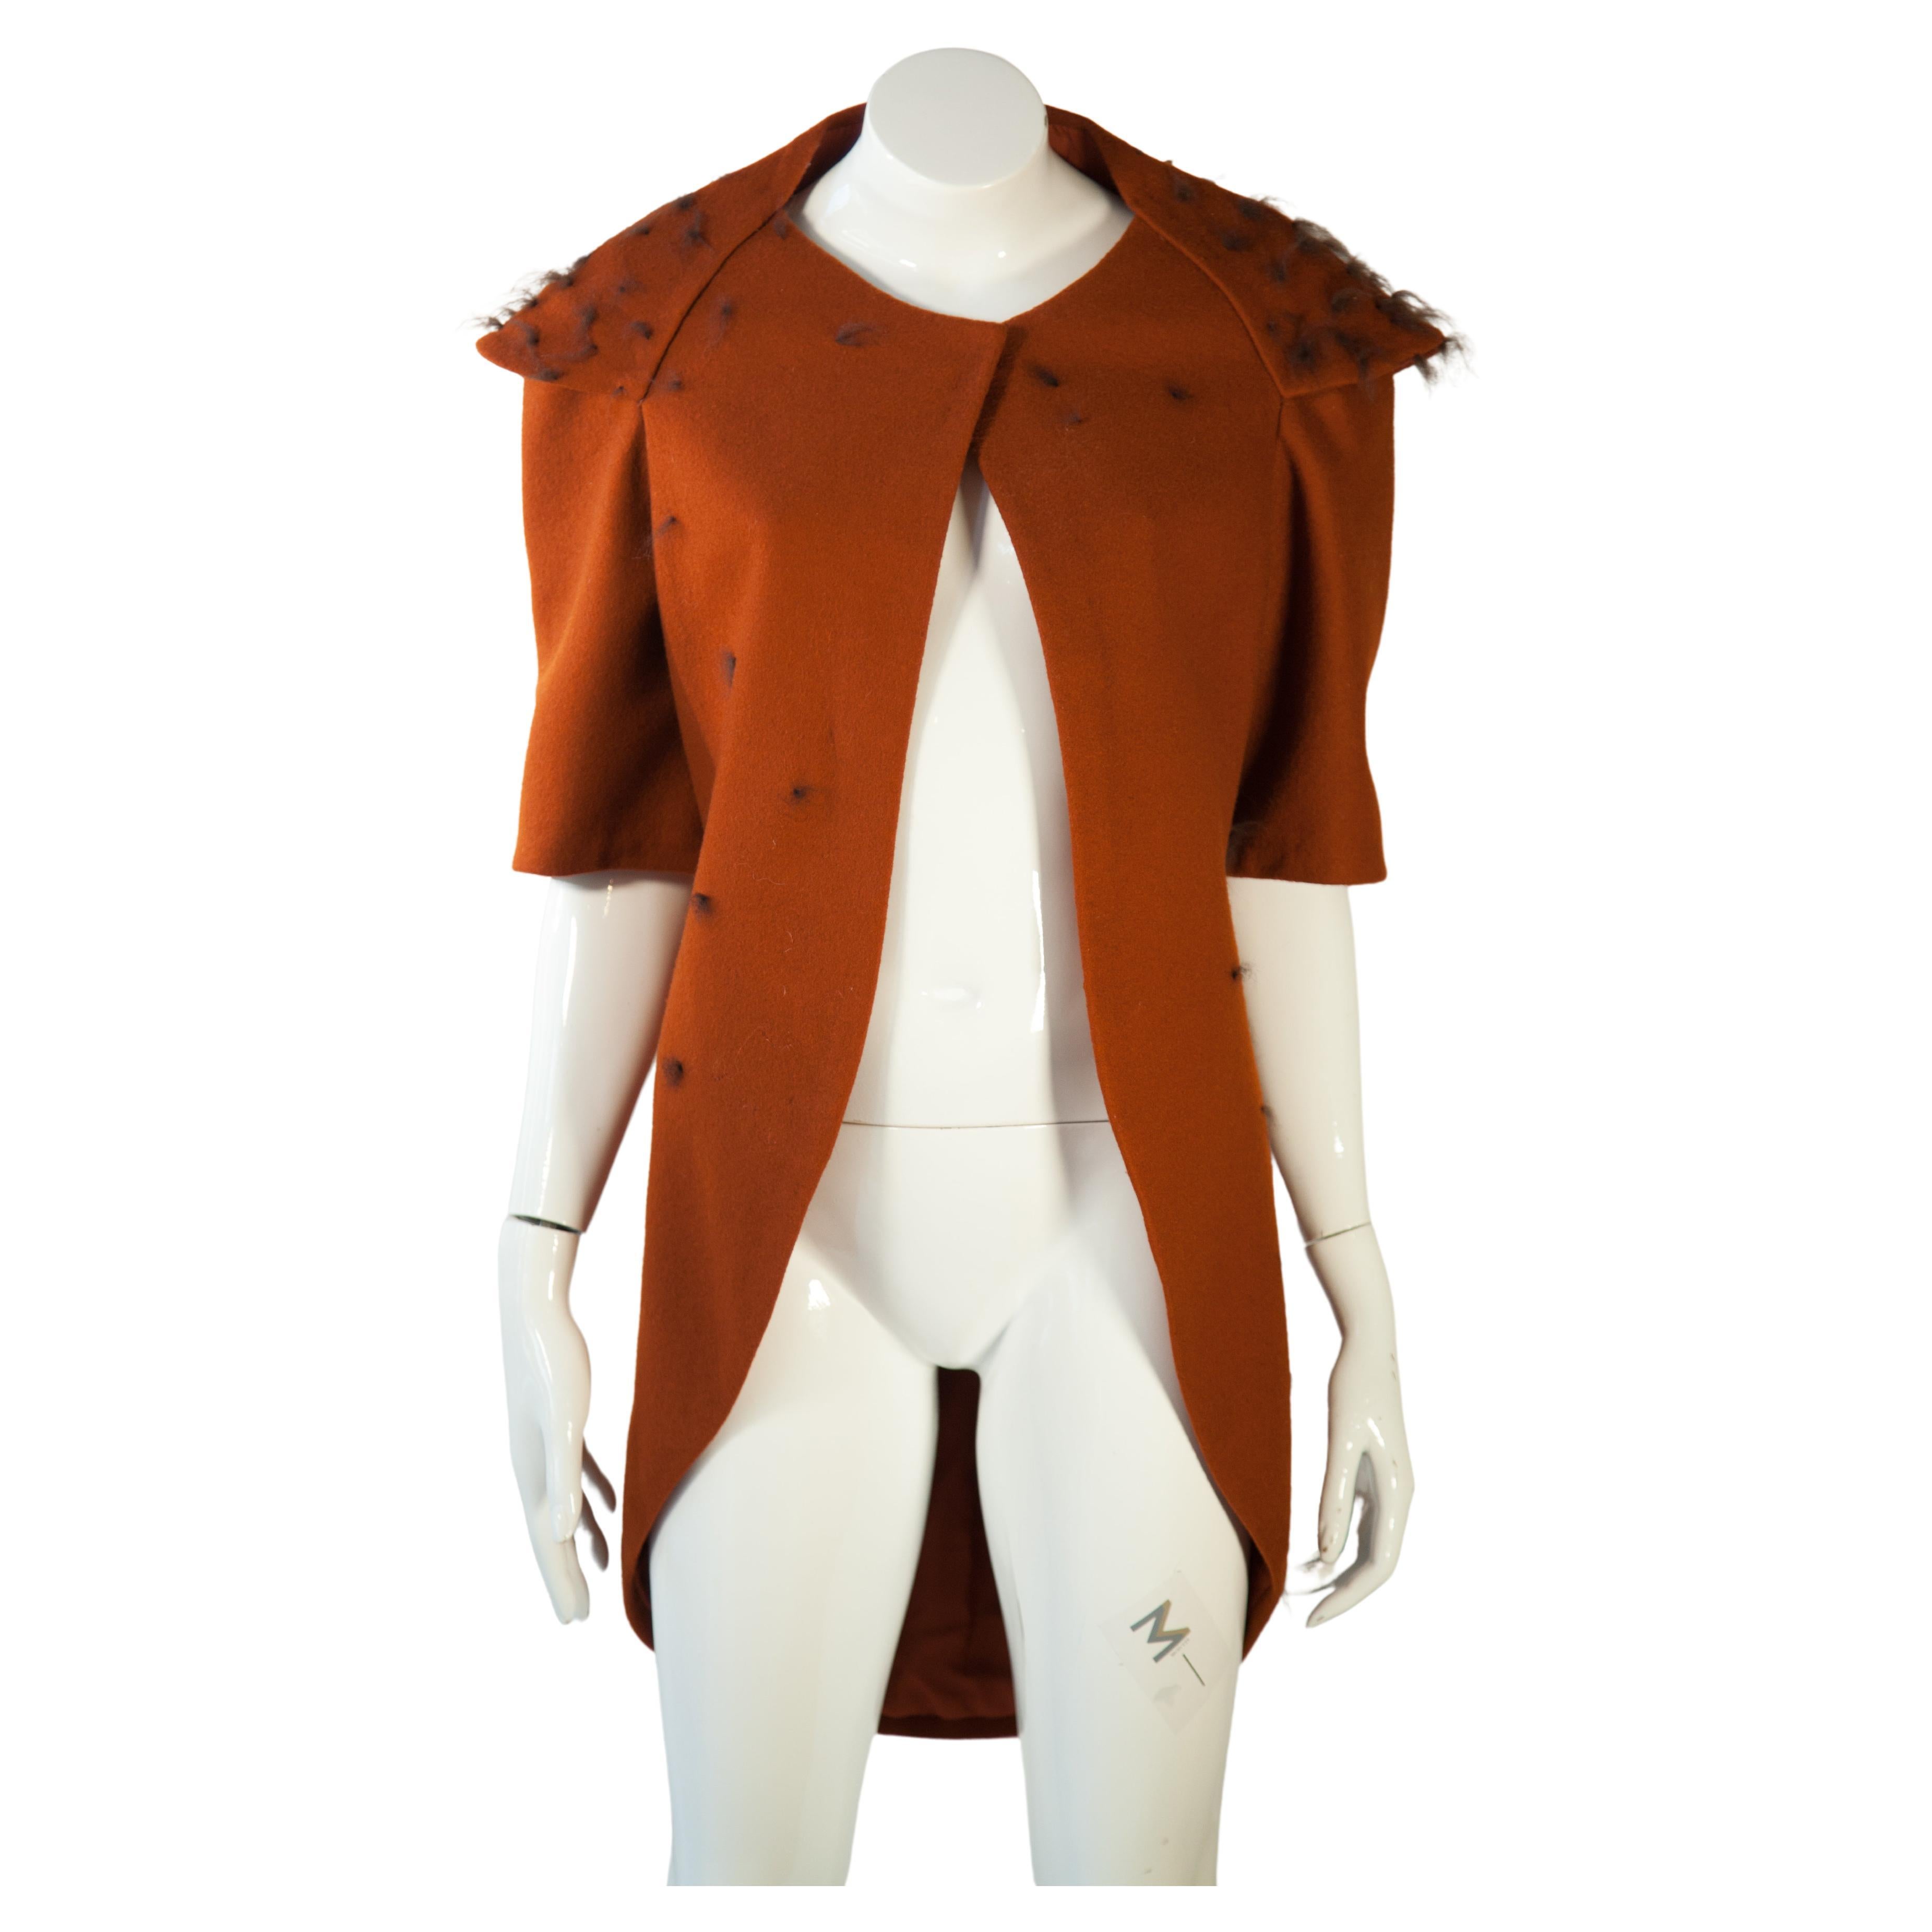 This Very Vintage Orange-Brown Color Dovetail cut jacket is a one-of-a-kind piece featuring rust-colored felt and detachable sleeves that provide versatility in style. Fur detail on the back and throughout increase visual interest and add a unique